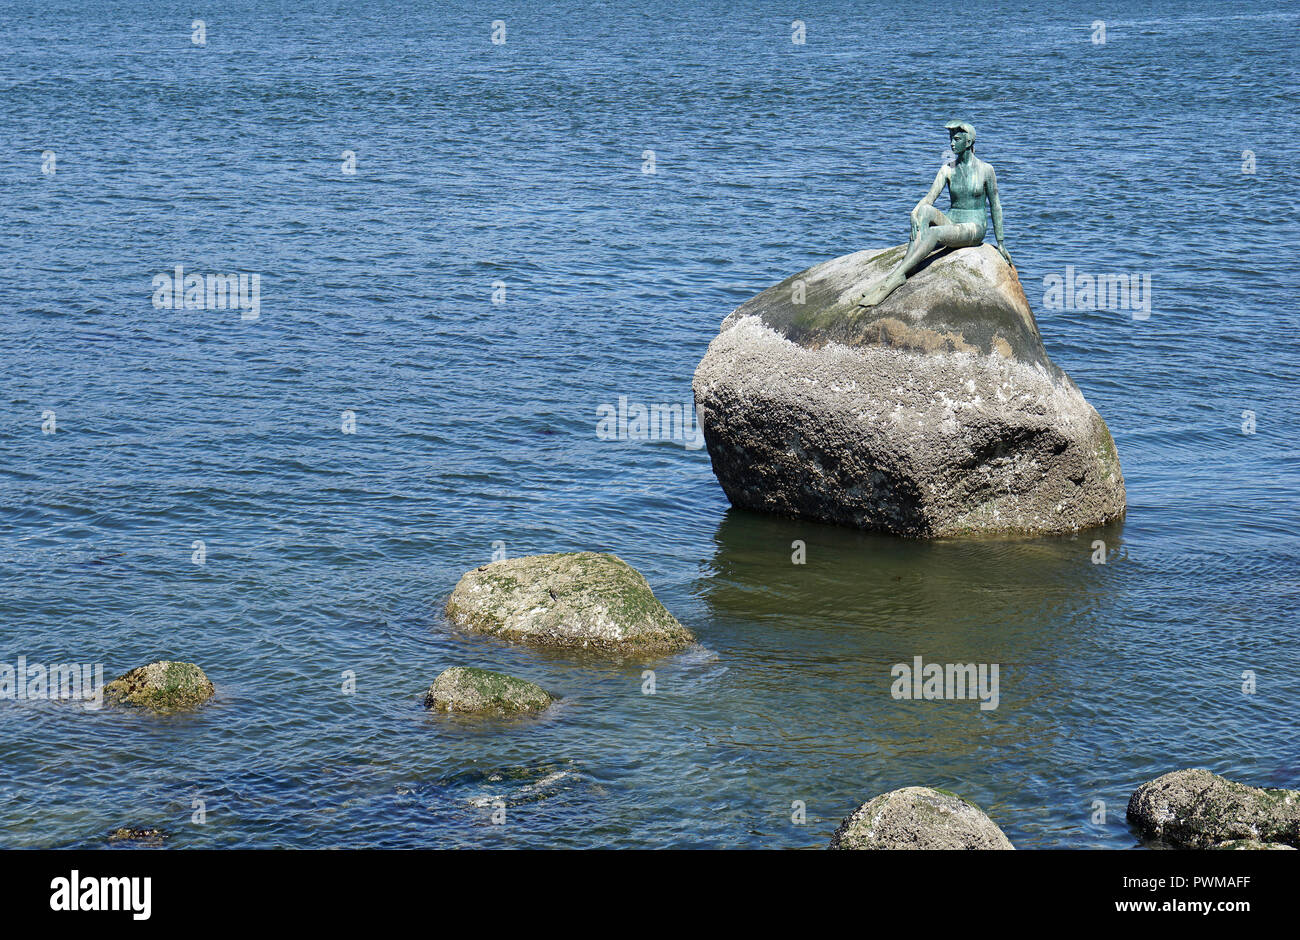 Girl in wetsuit, sculpture at Stanley Park, Vancouver, Canada Stock Photo